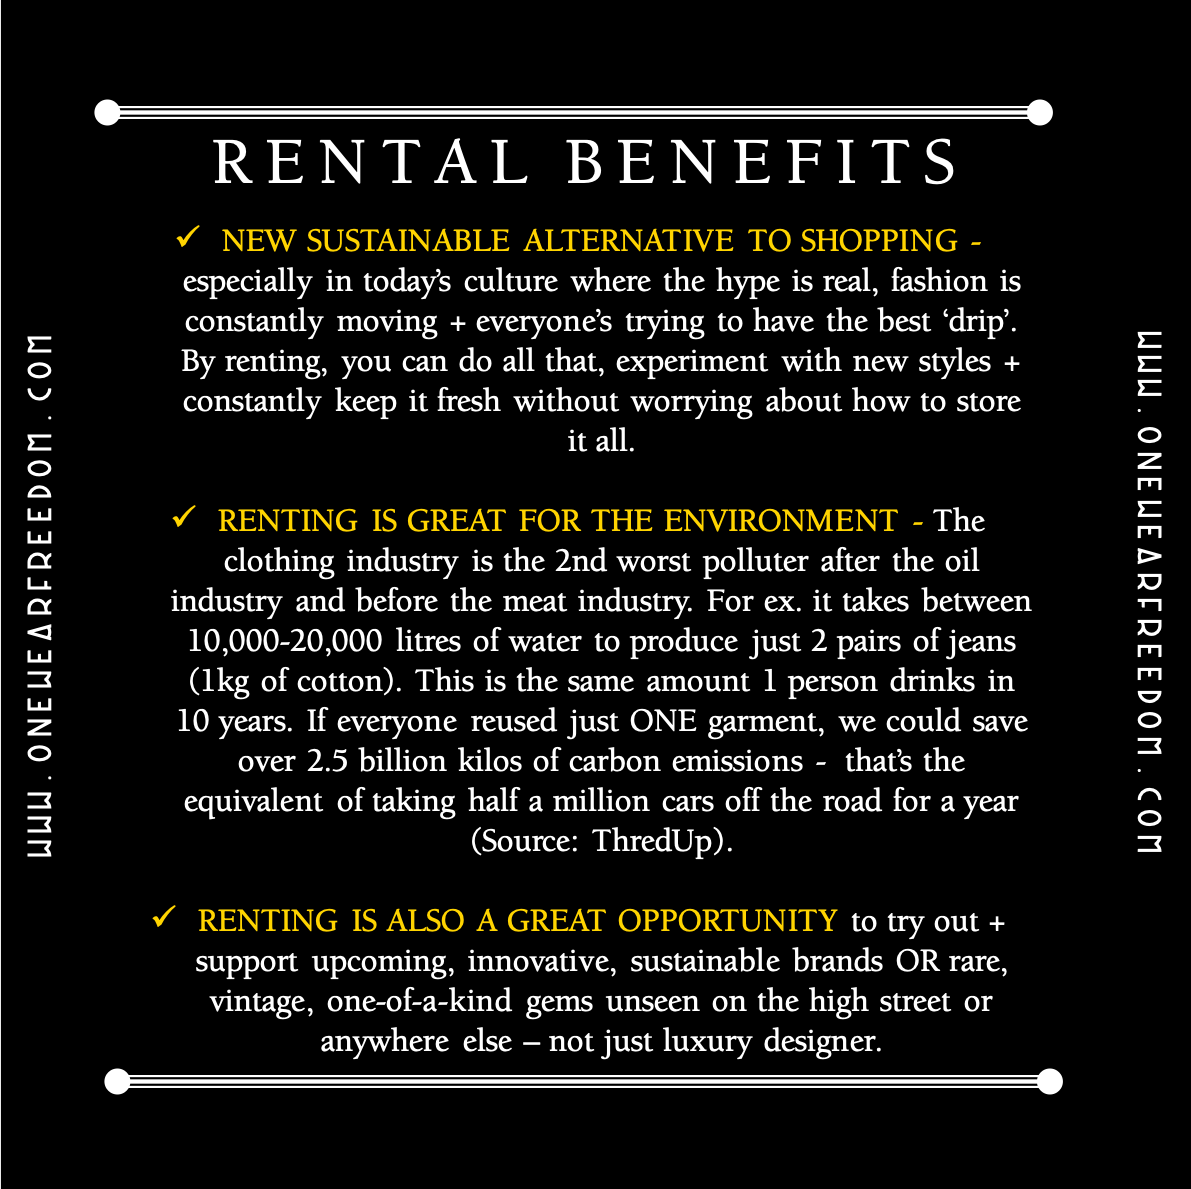 Rental Benefits: NEW SUSTAINABLE ALTERNATIVE TO SHOPPING - especially in today’s culture where the hype is real, fashion is constantly moving + everyone’s trying to have the best ‘drip’. By renting, you can do all that, experiment with new styles + constantly keep it fresh without worrying about how to store it all.  RENTING IS GREAT FOR THE ENVIRONMENT - The clothing industry is the 2nd worst polluter after the oil industry and before the meat industry. For ex. it takes between 10,000-20,000 litres of water to produce just 2 pairs of jeans (1kg of cotton). This is the same amount 1 person drinks in 10 years. If everyone reused just ONE garment, we could save over 2.5 billion kilos of carbon emissions -  that’s the equivalent of taking half a million cars off the road for a year (Source: ThredUp).  RENTING IS ALSO A GREAT OPPORTUNITY to try out + support upcoming, innovative, sustainable brands OR rare, vintage, one-of-a-kind gems unseen on the high street or anywhere else – not just luxury designer.